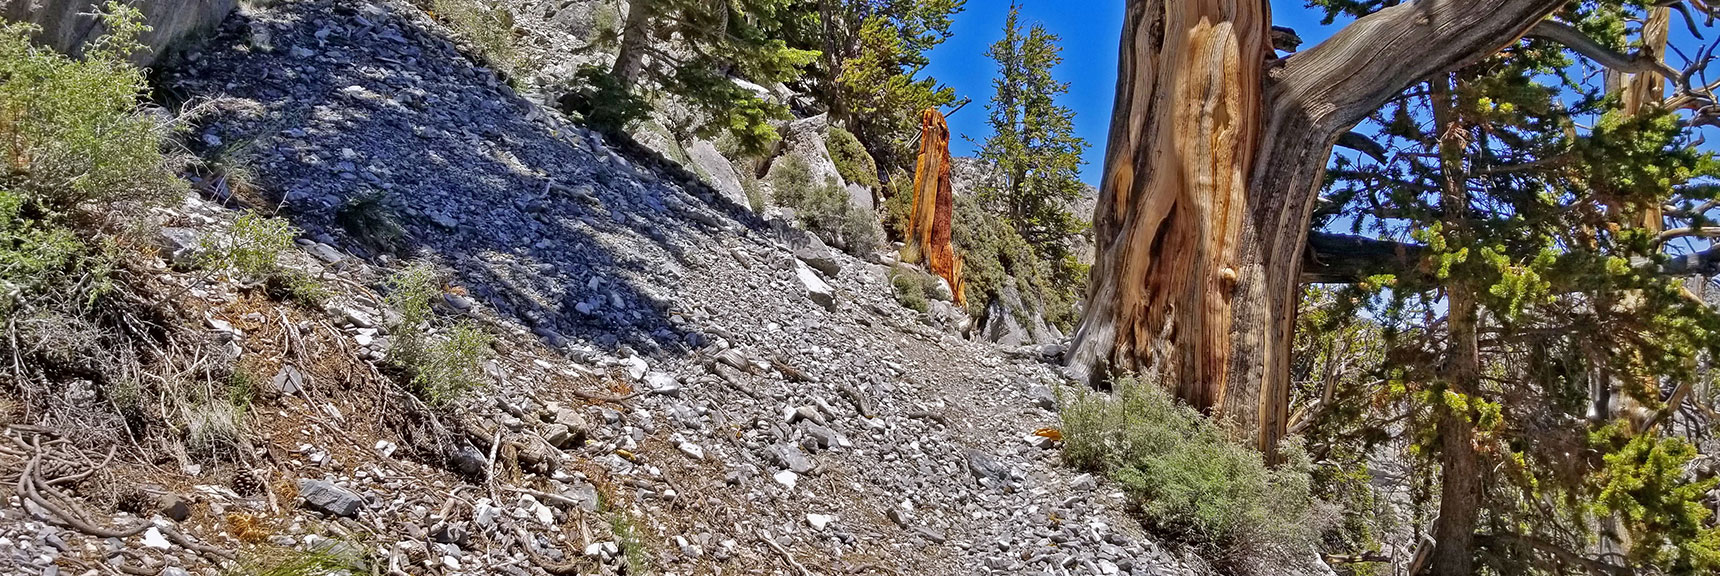 Hard Left Ahead Will Lead to Beginning of Final Approach Ledge (Band of Trees) | Macks Peak | Mt Charleston Wilderness | Spring Mountains, Nevada